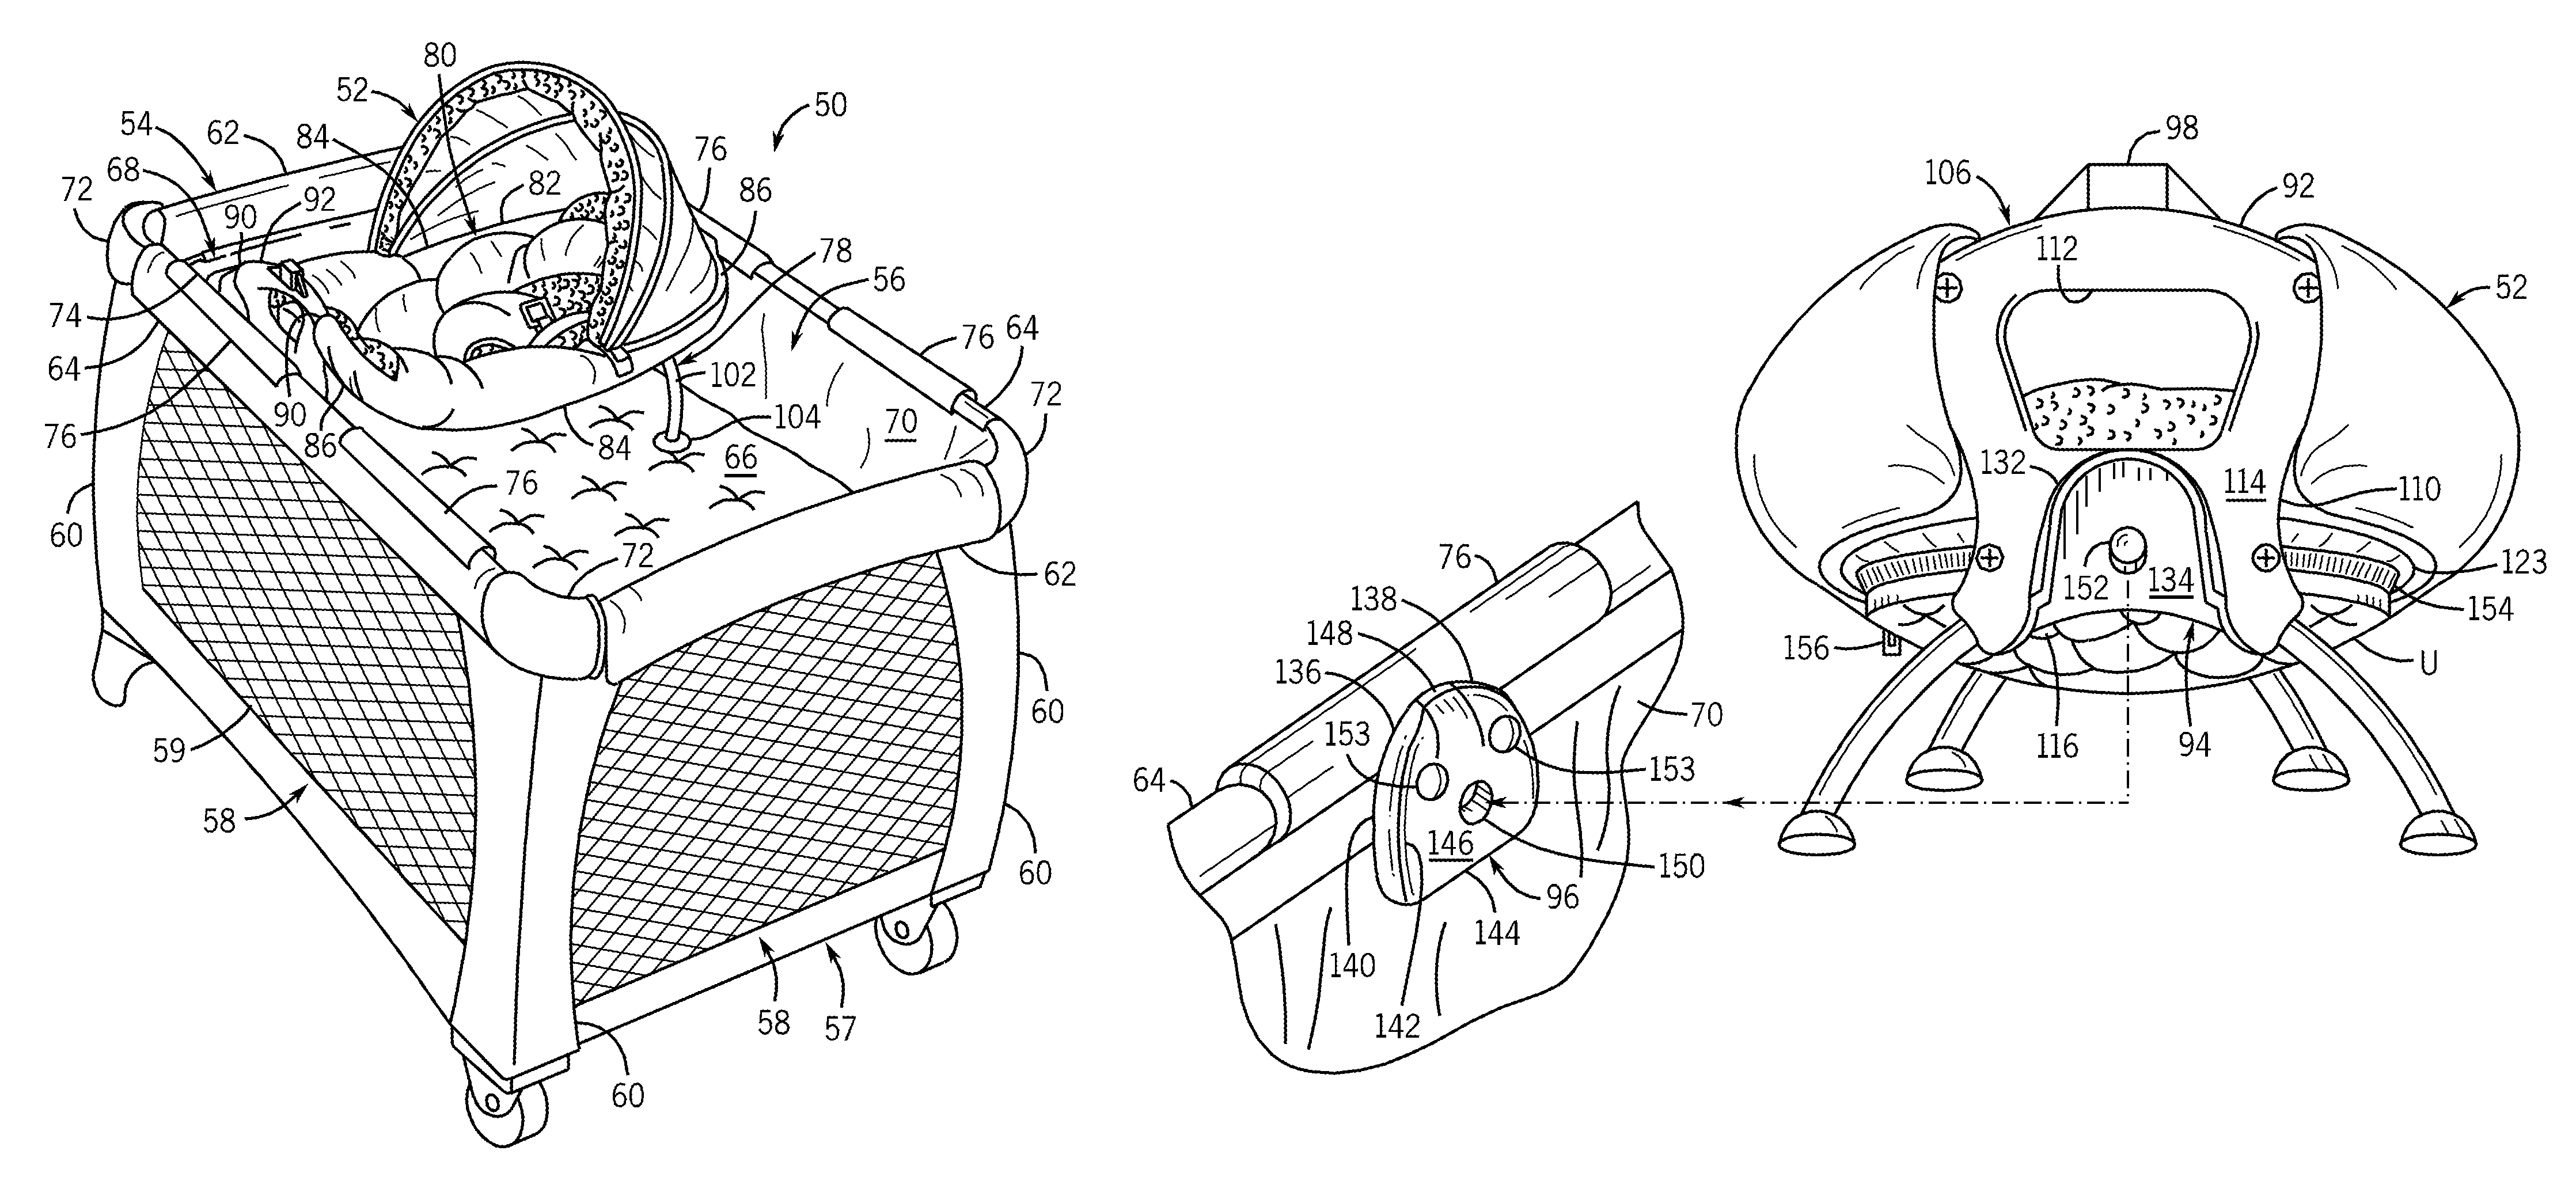 Child containment system with multiple infant support modes